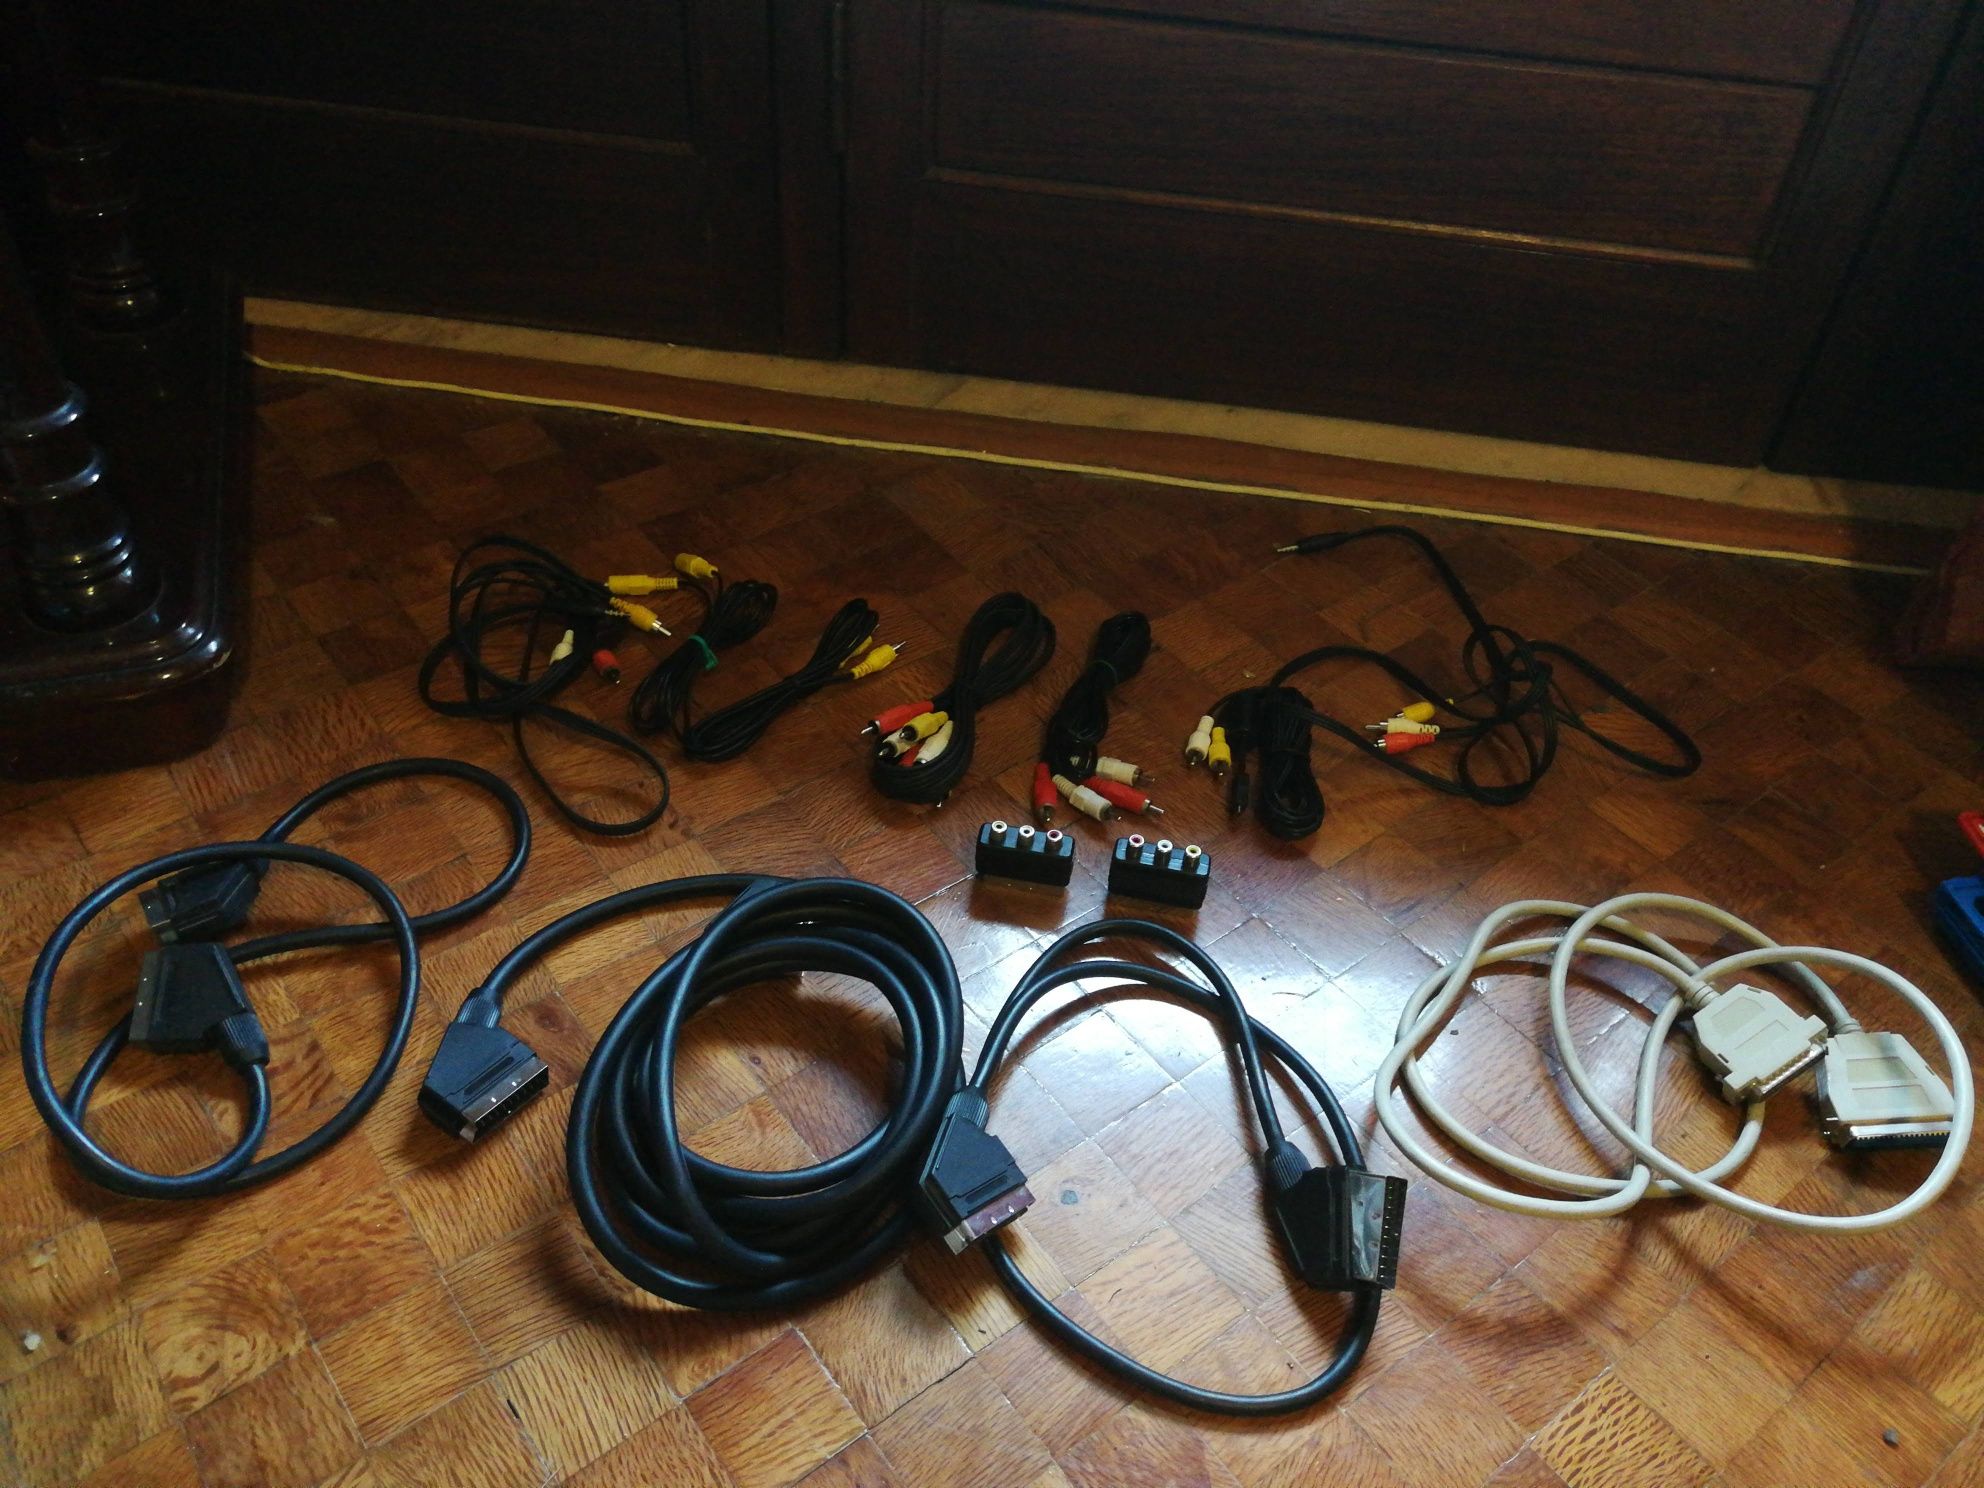 Lote Cabos Ethernet, HDMI, Scart Audio-Video/RGB/DVD